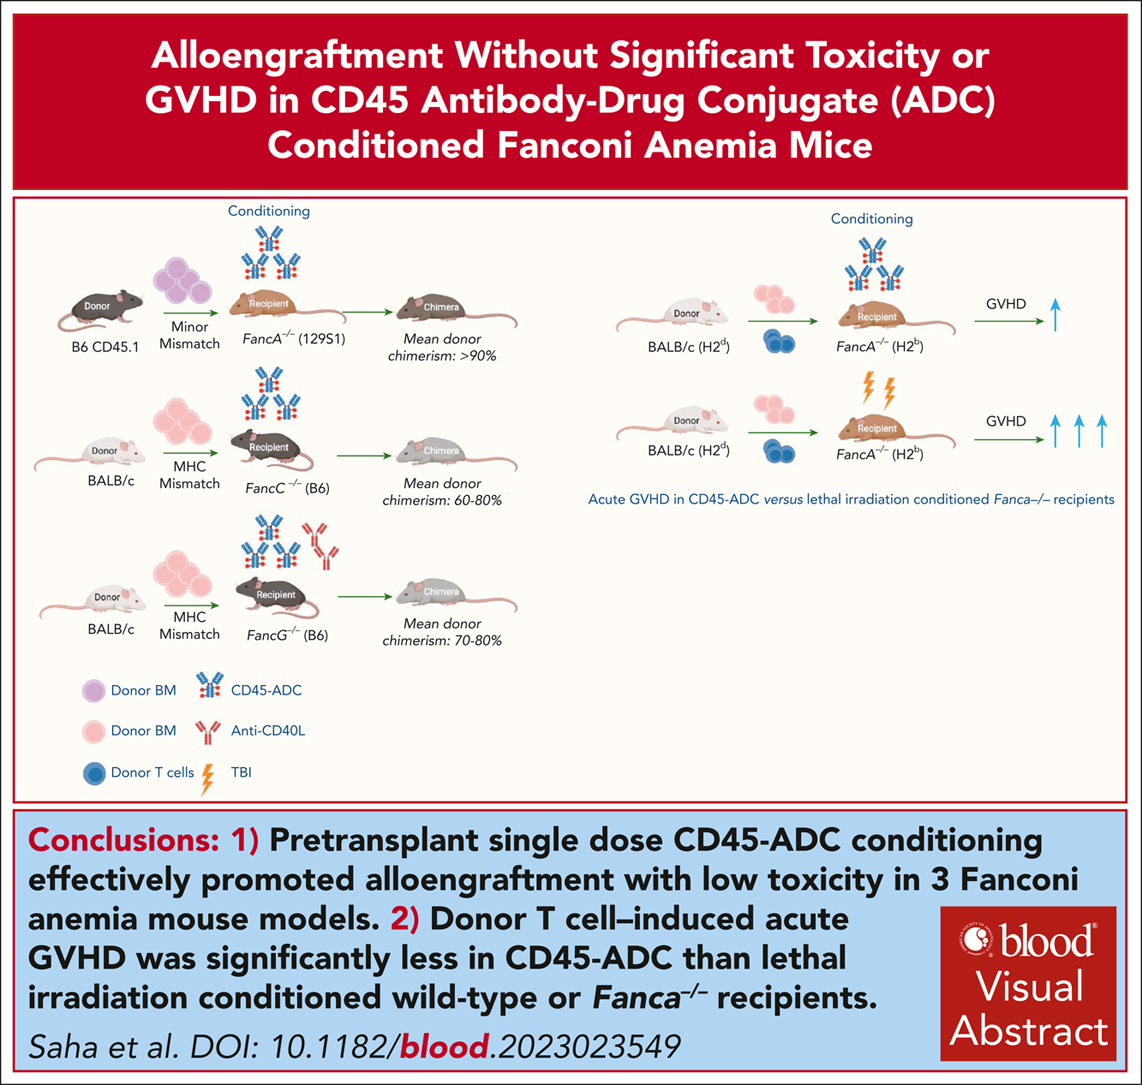 Acute GVHD induced by donor T cells was significantly less in CD45-ADC vs lethal irradiation conditioned wild-type or Fanca−/− recipients. ow.ly/Ywlg50RTHV0 #transplantation #hematopoiesisandstemcells